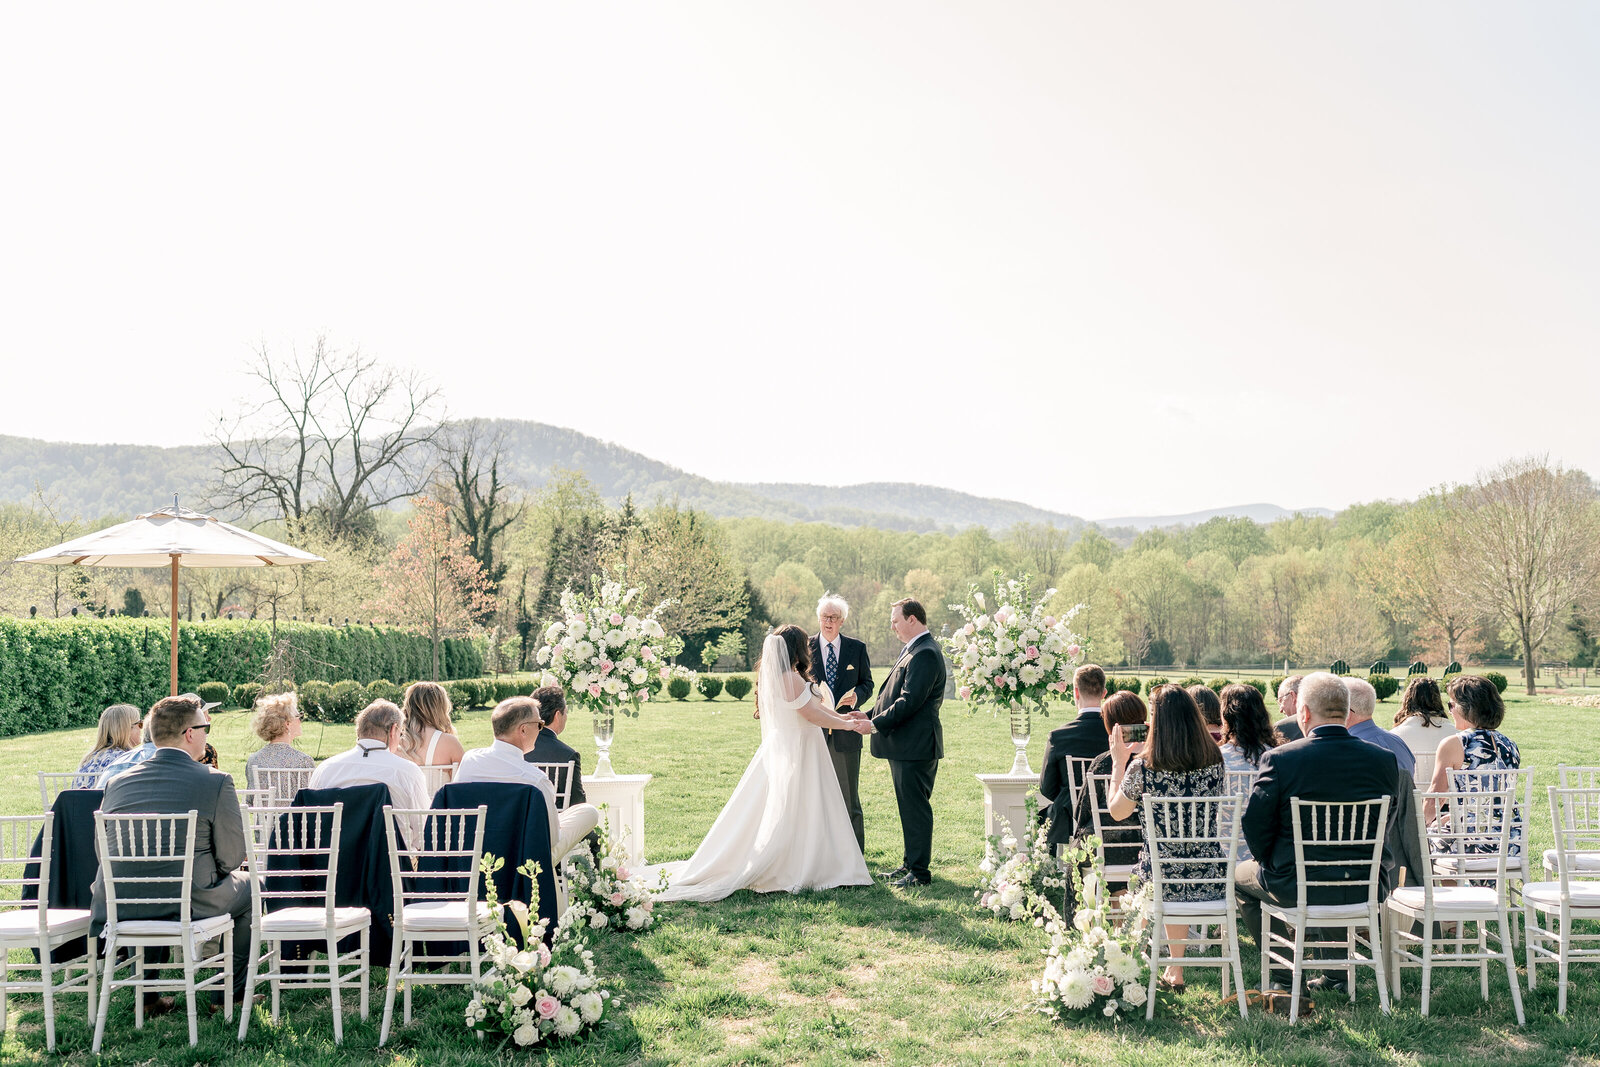 A wedding ceremony with a view of the mountains at The Inn at Little Washington in Virginia